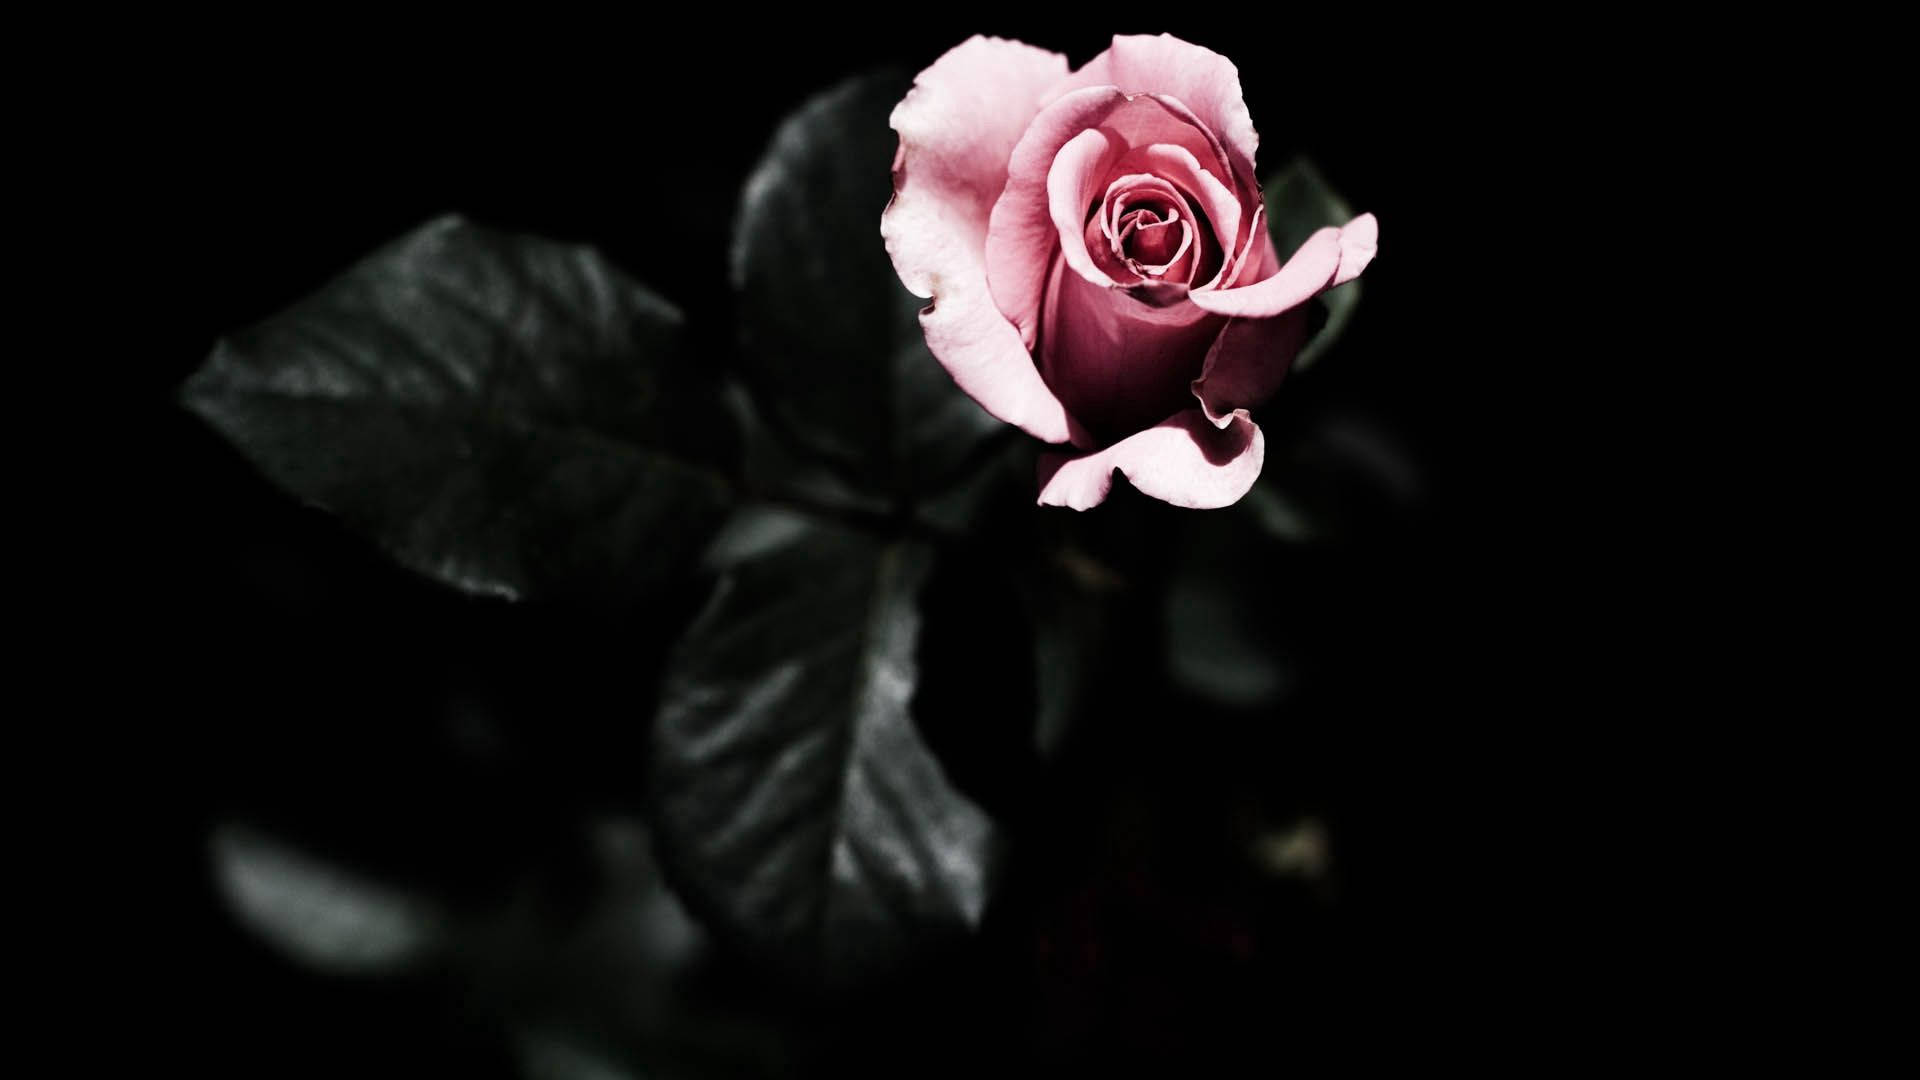 A Pink Rose Is Shown In The Dark Background